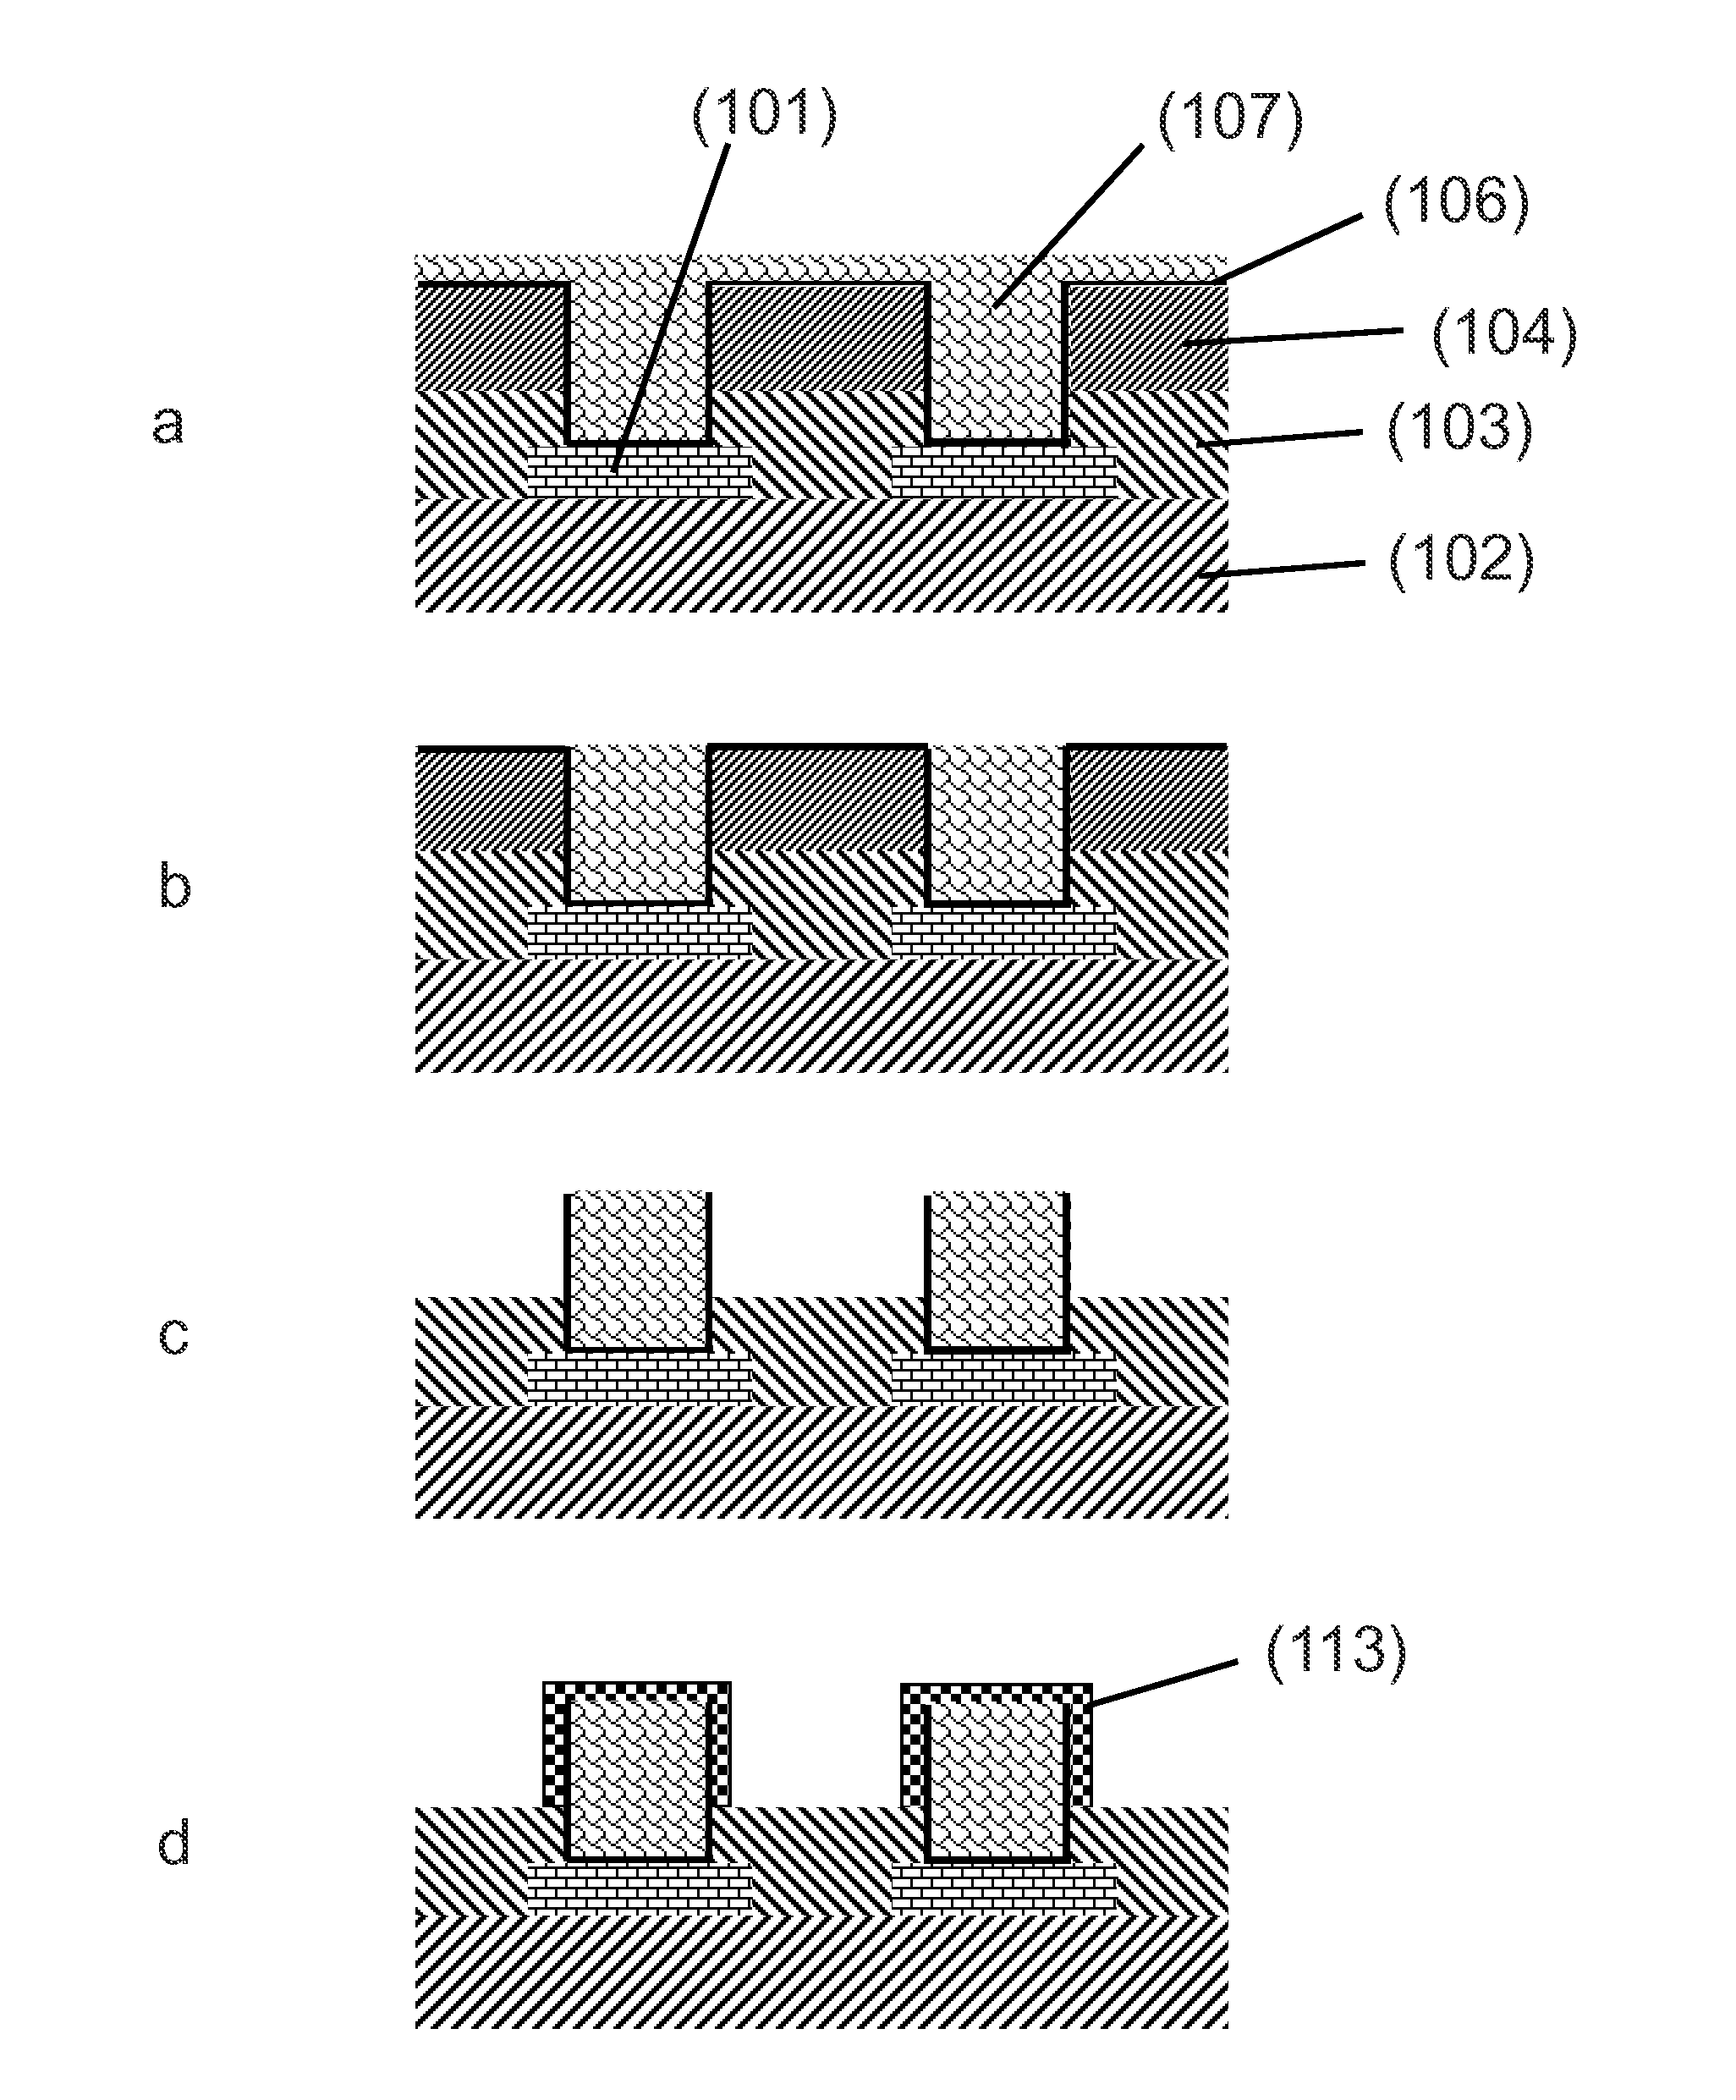 Method to form solder deposits and non-melting bump structures on substrates